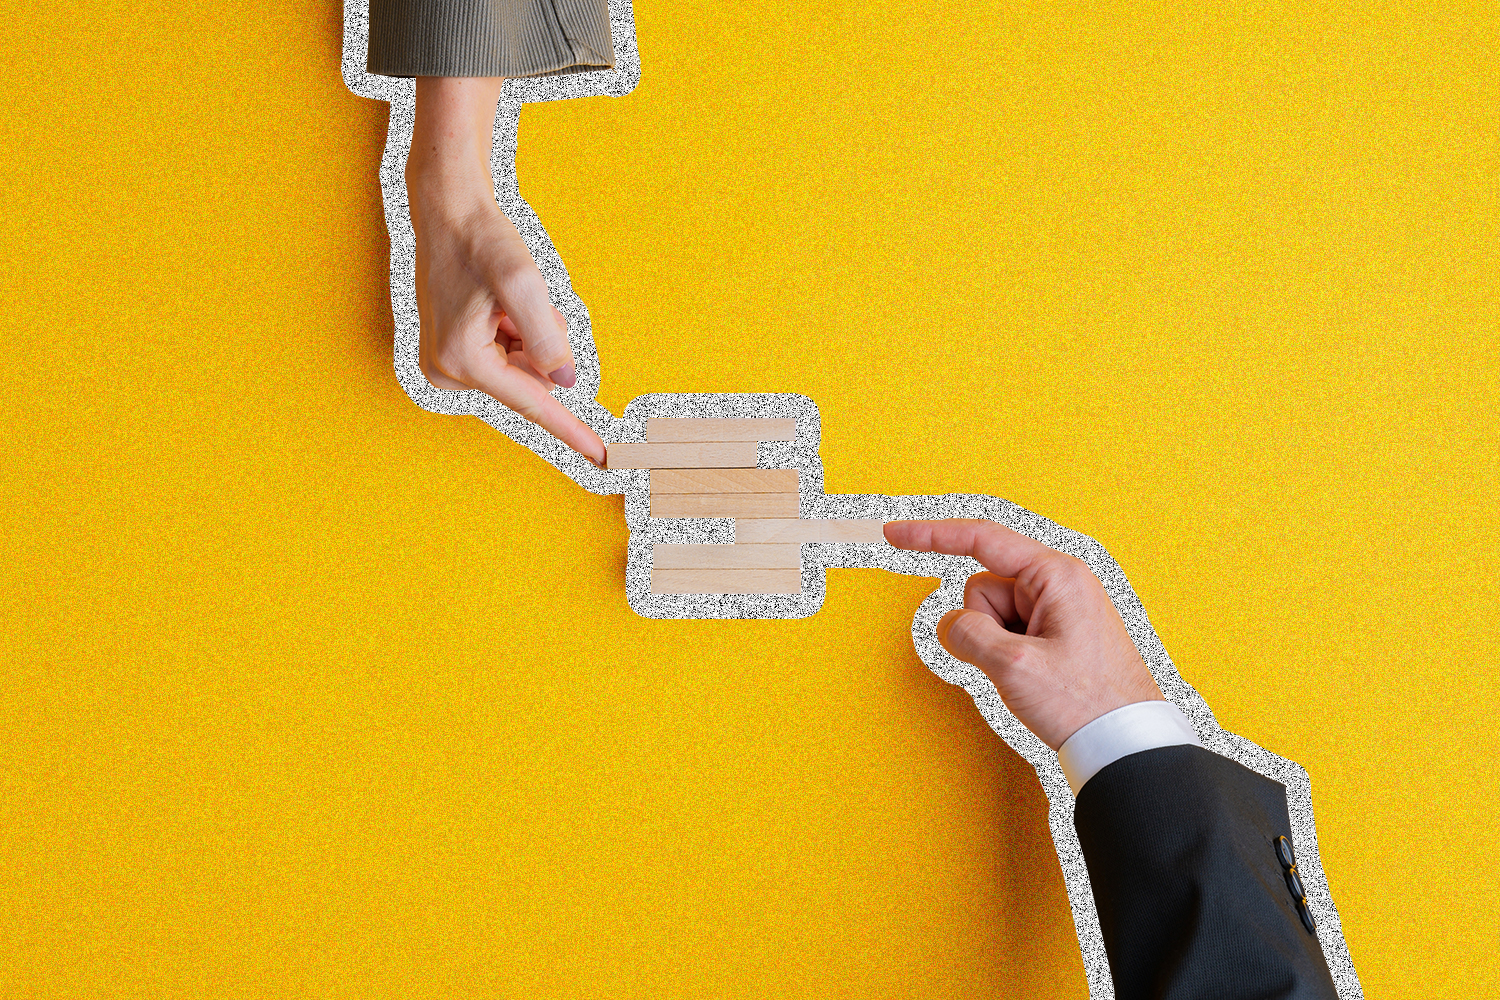 Two hands pushing wooden blocks together on a yellow background